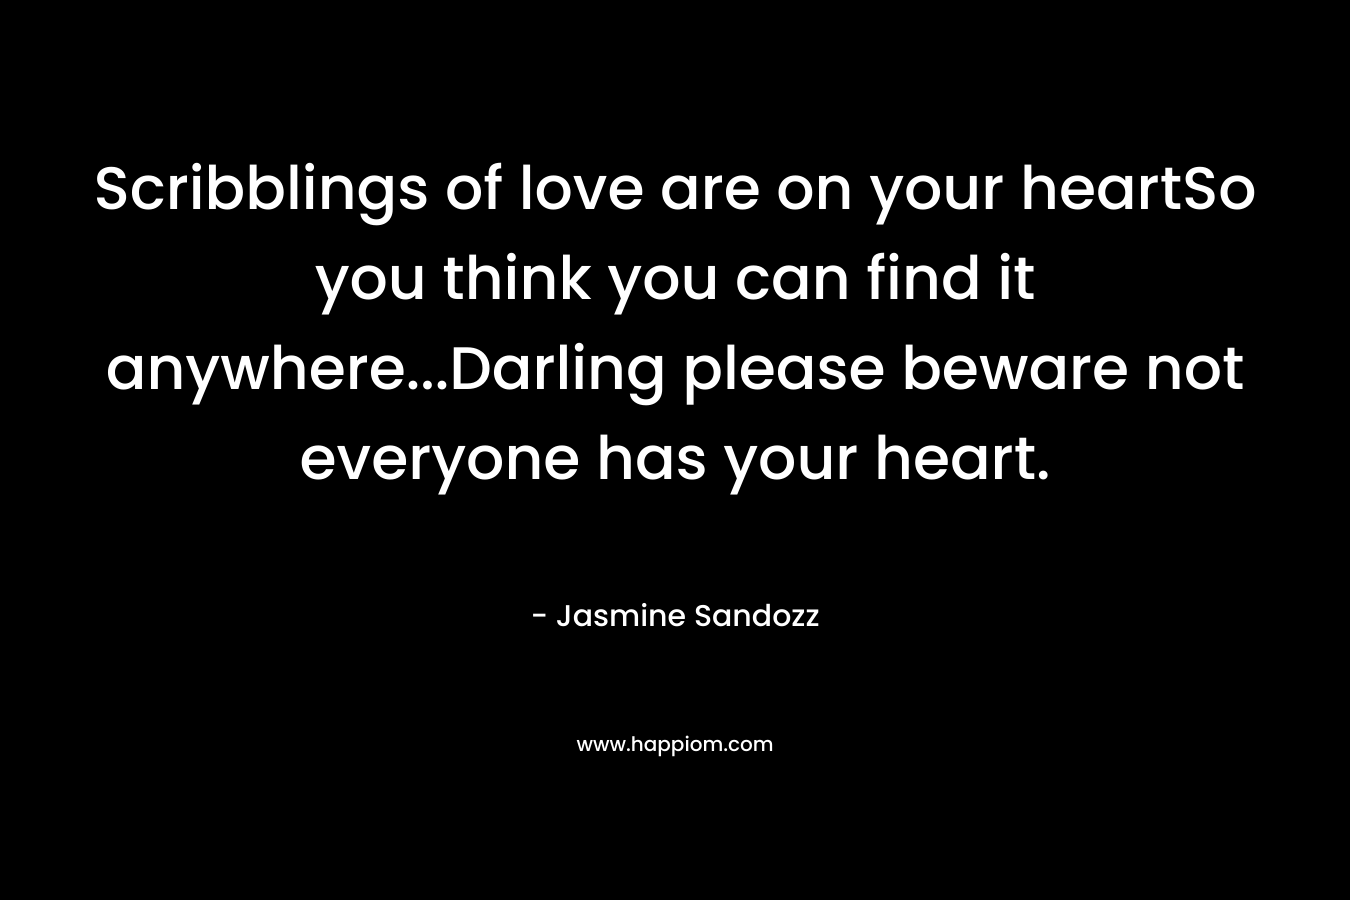 Scribblings of love are on your heartSo you think you can find it anywhere…Darling please beware not everyone has your heart. – Jasmine Sandozz